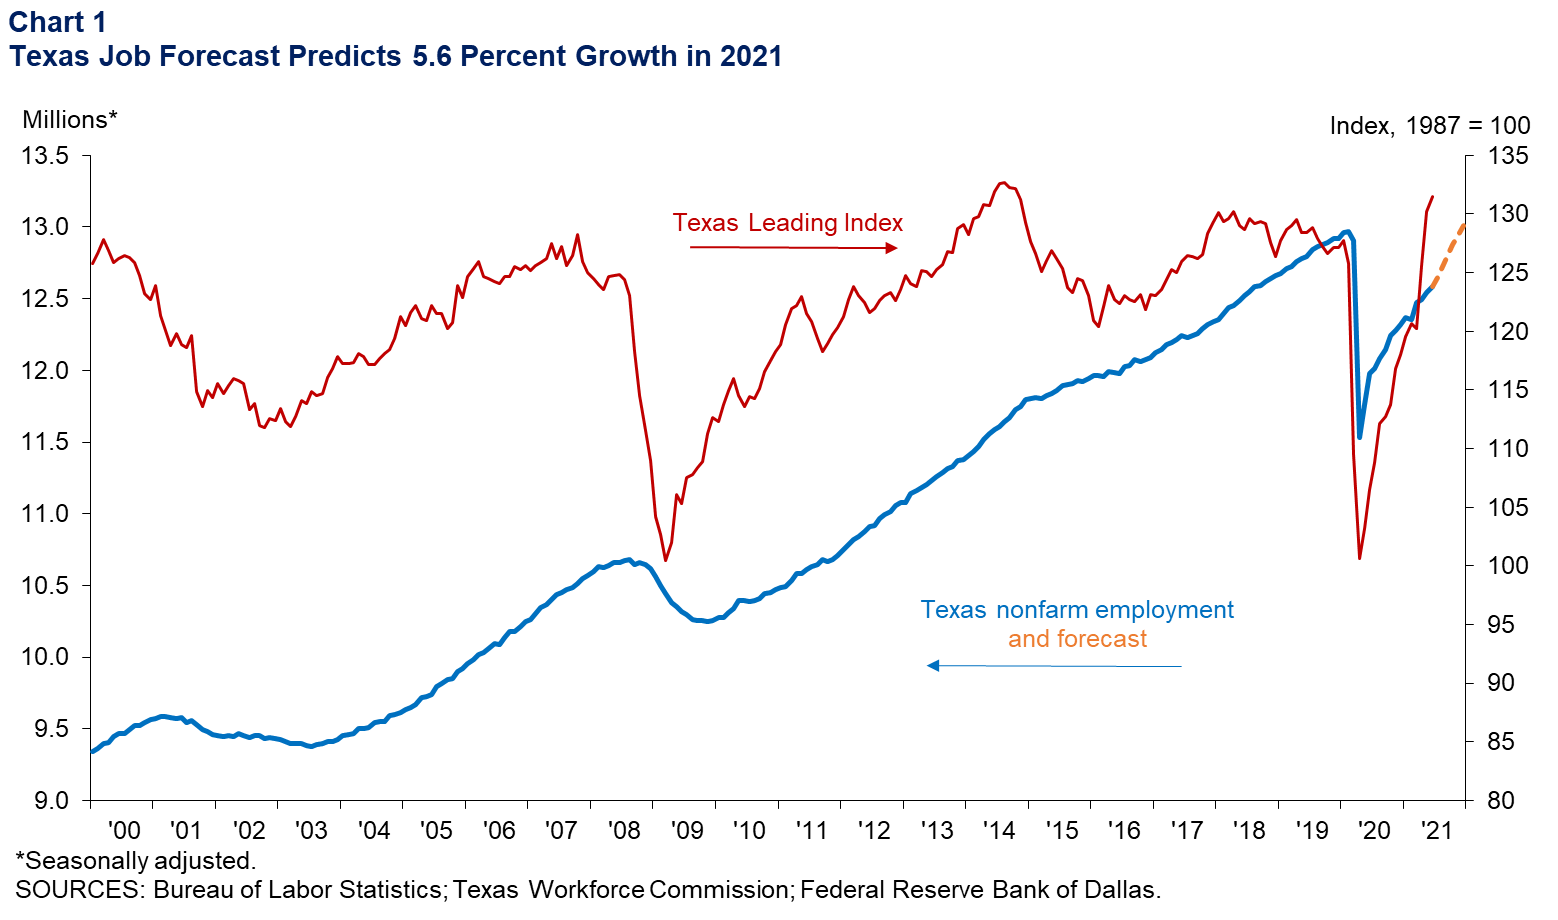 Texas Job Forecast Predicts 6.6 Percent Growth in 2021